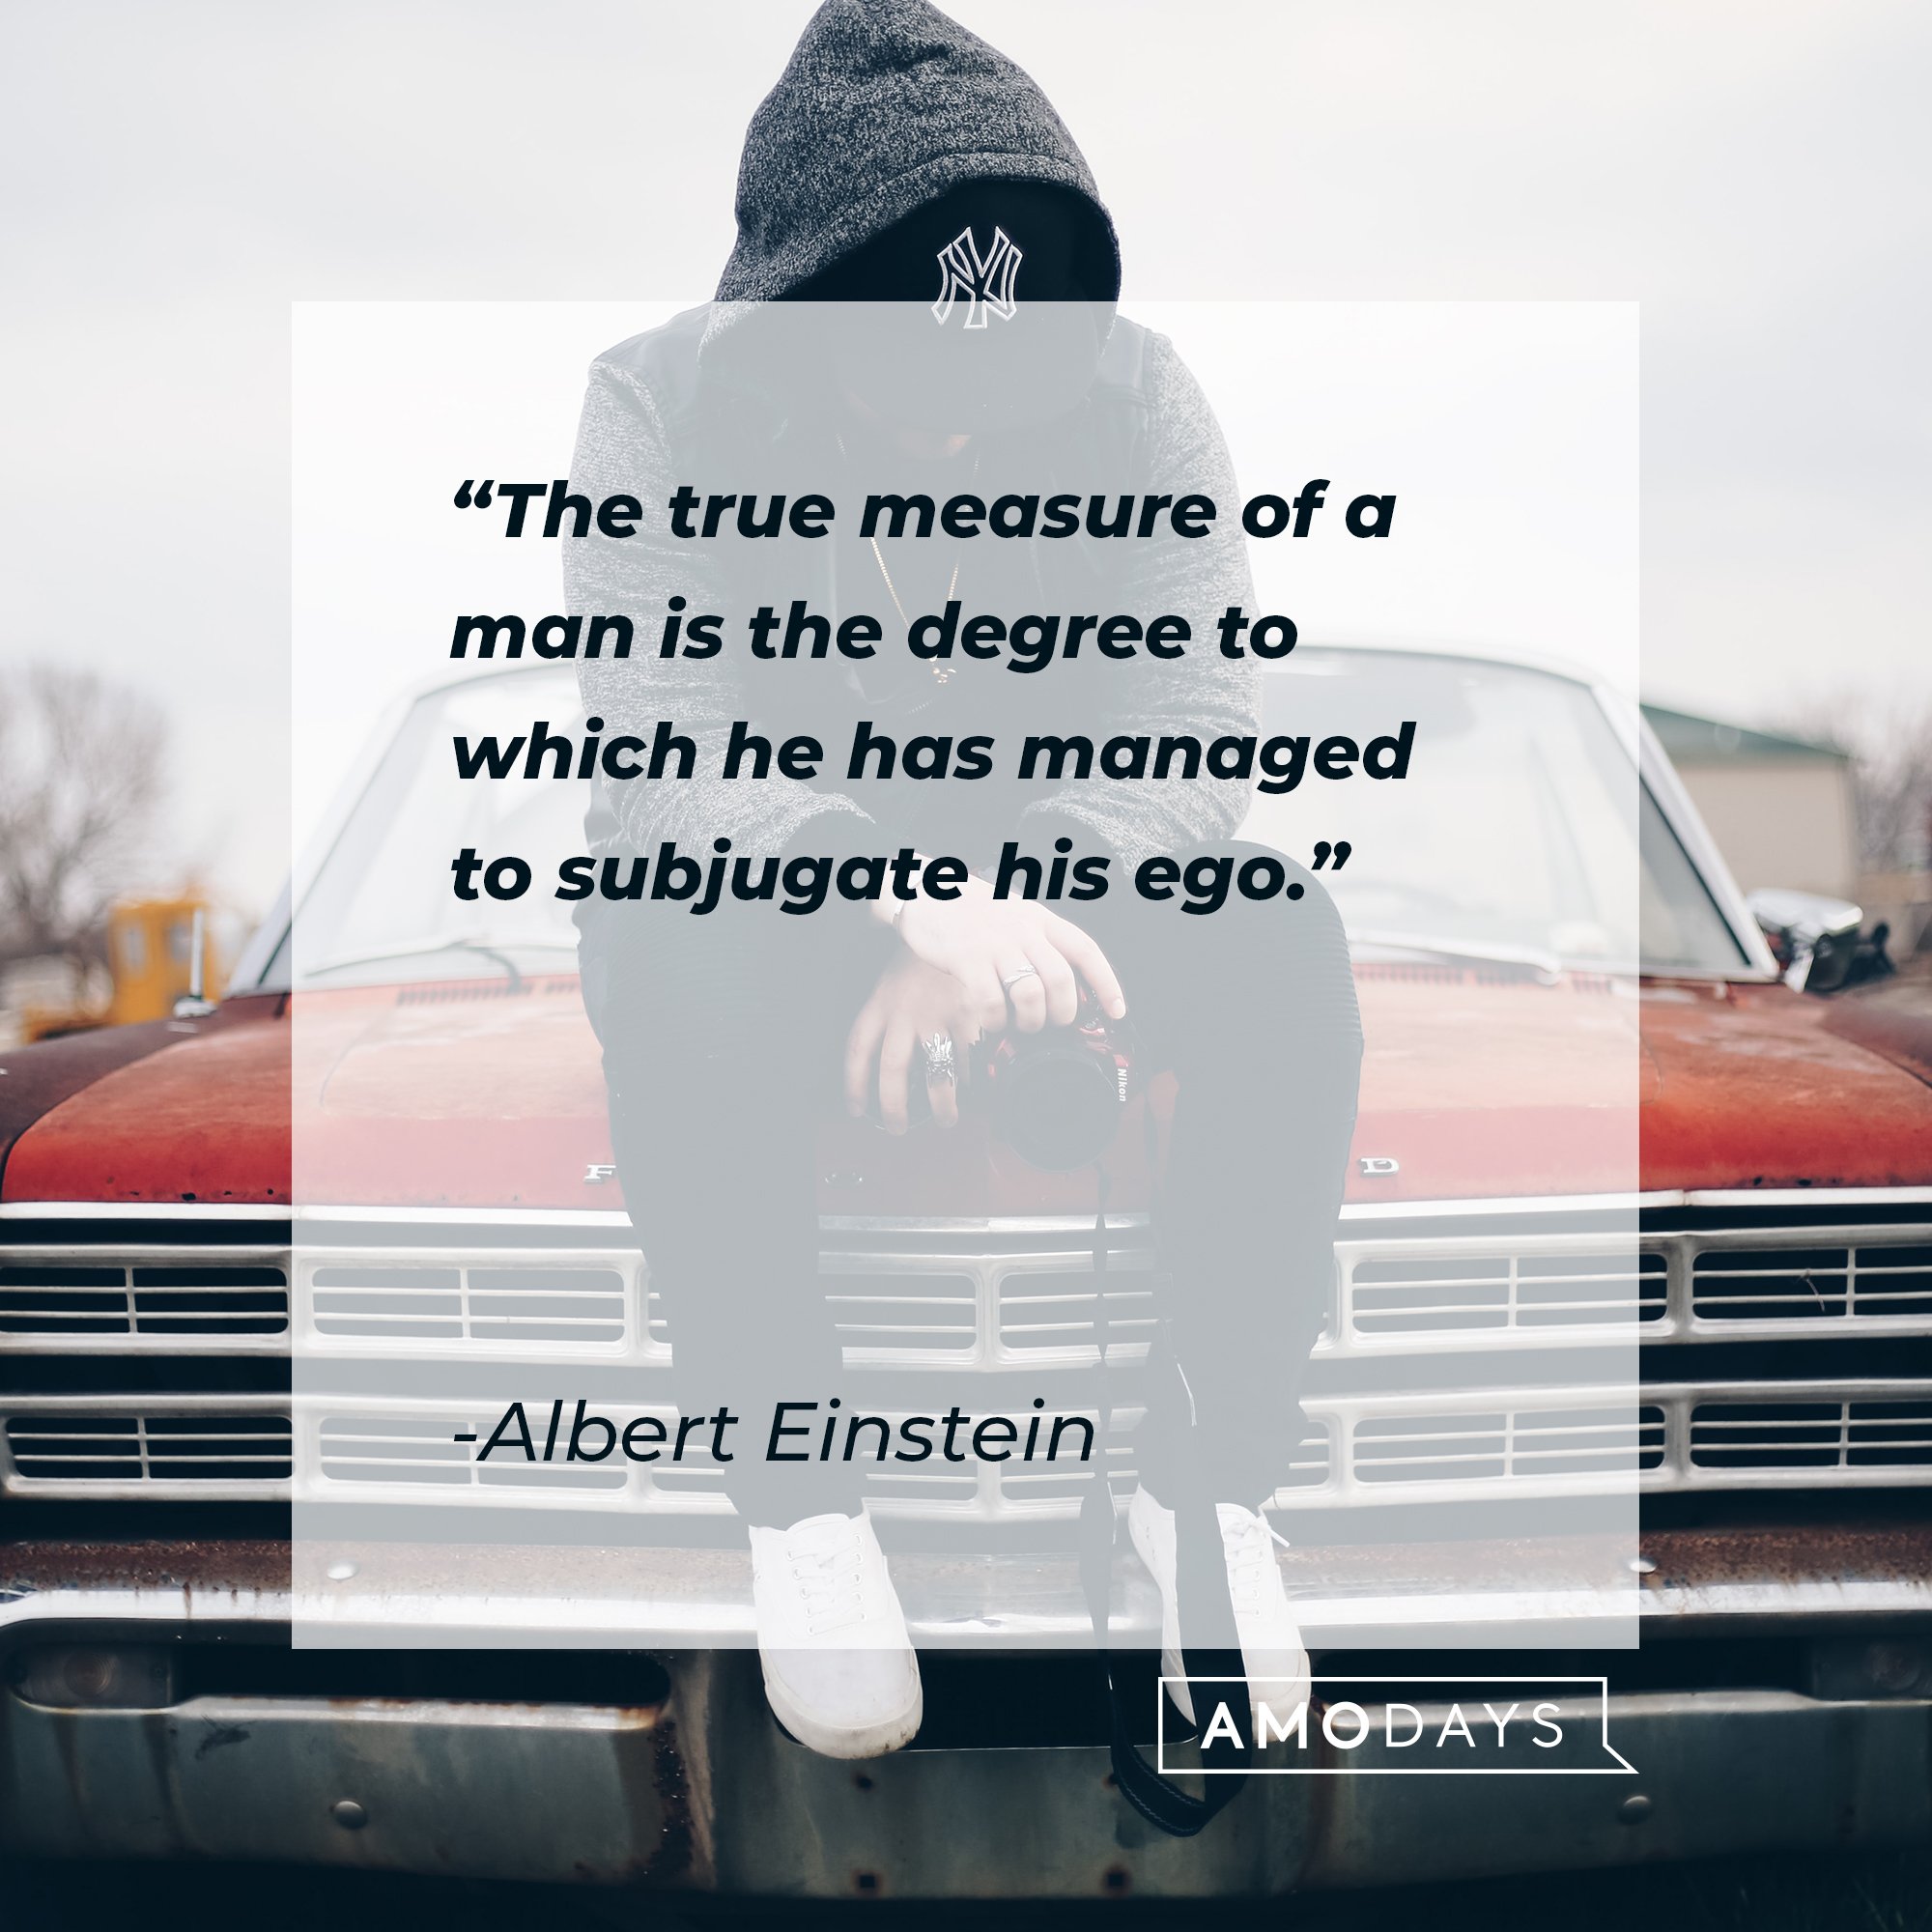  Albert Einstein’s quote: "The true measure of a man is the degree to which he has managed to subjugate his ego." | Image: AmoDays